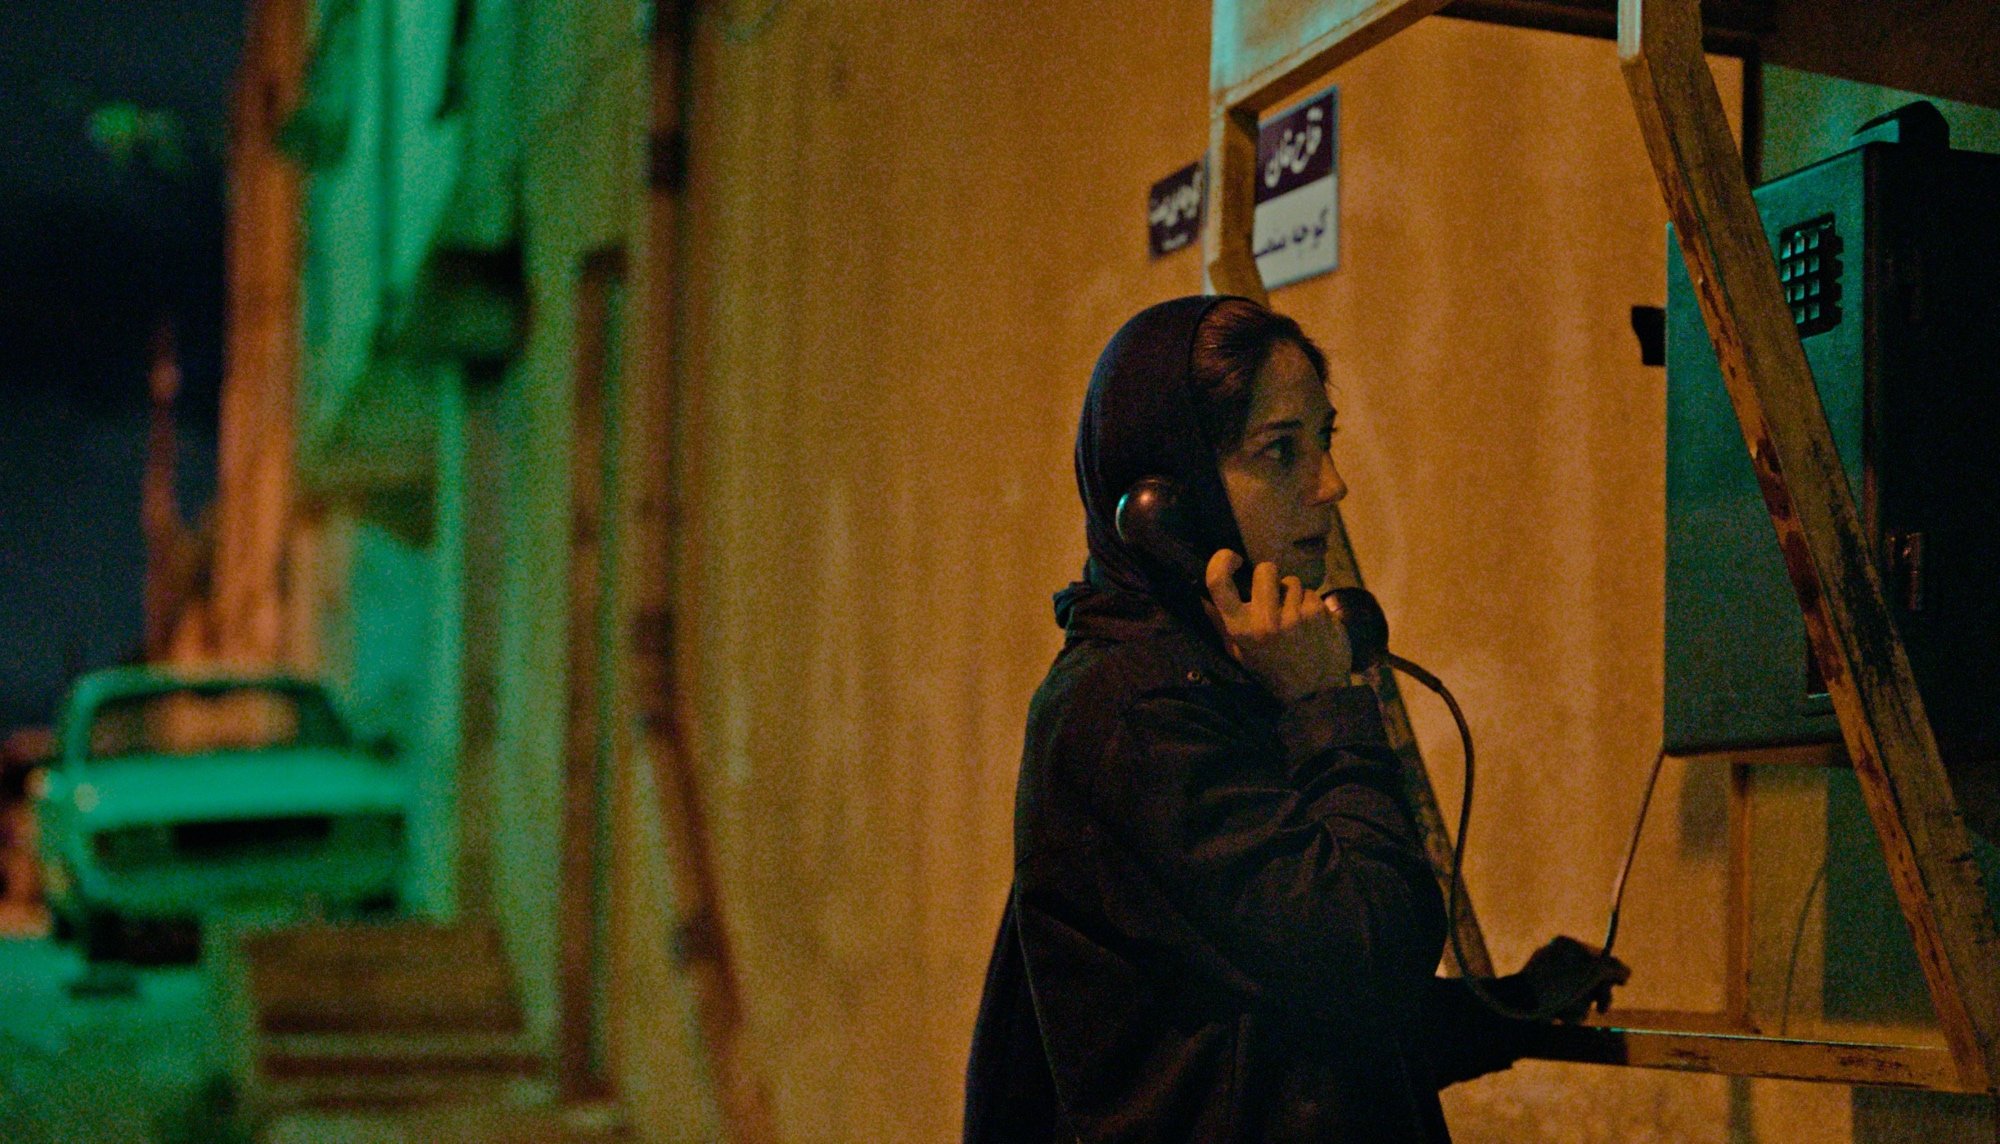 'Holy Spider' Far Amir-Ebrahimi as Rahimi looking frightened, talking on a public phone at night.